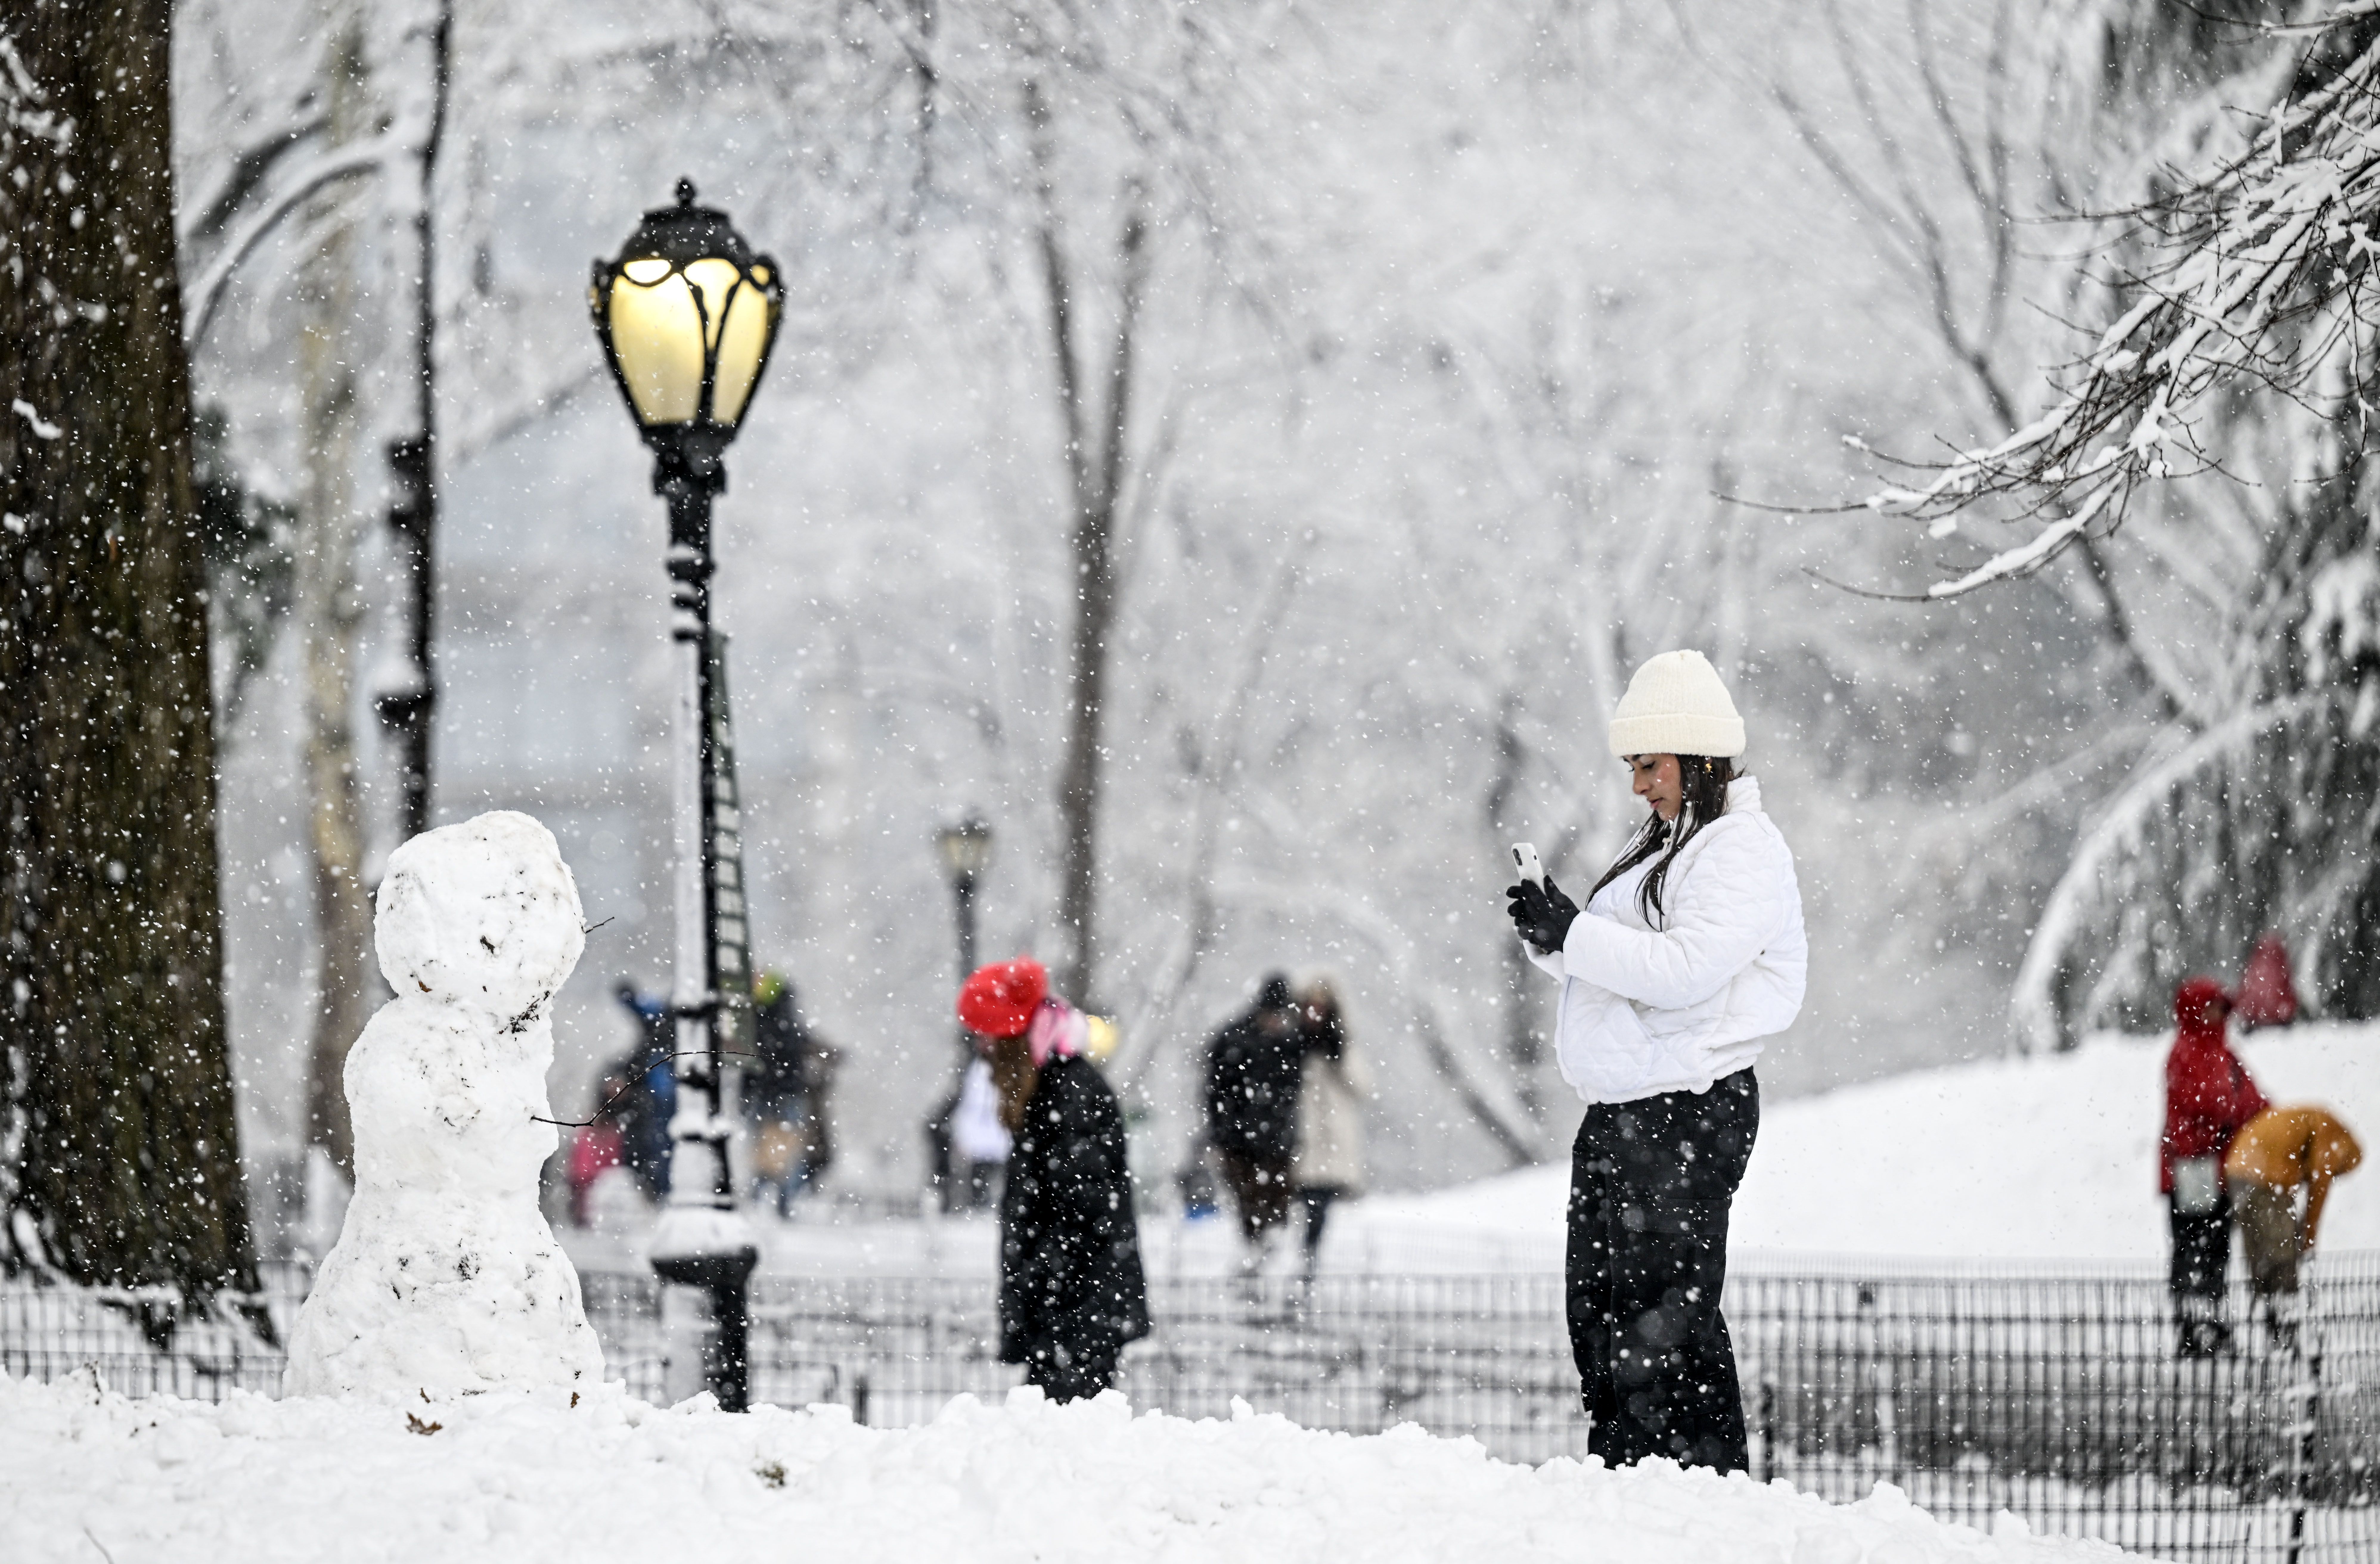 A person taking a photo of a snowman in Central Park on Feb. 13